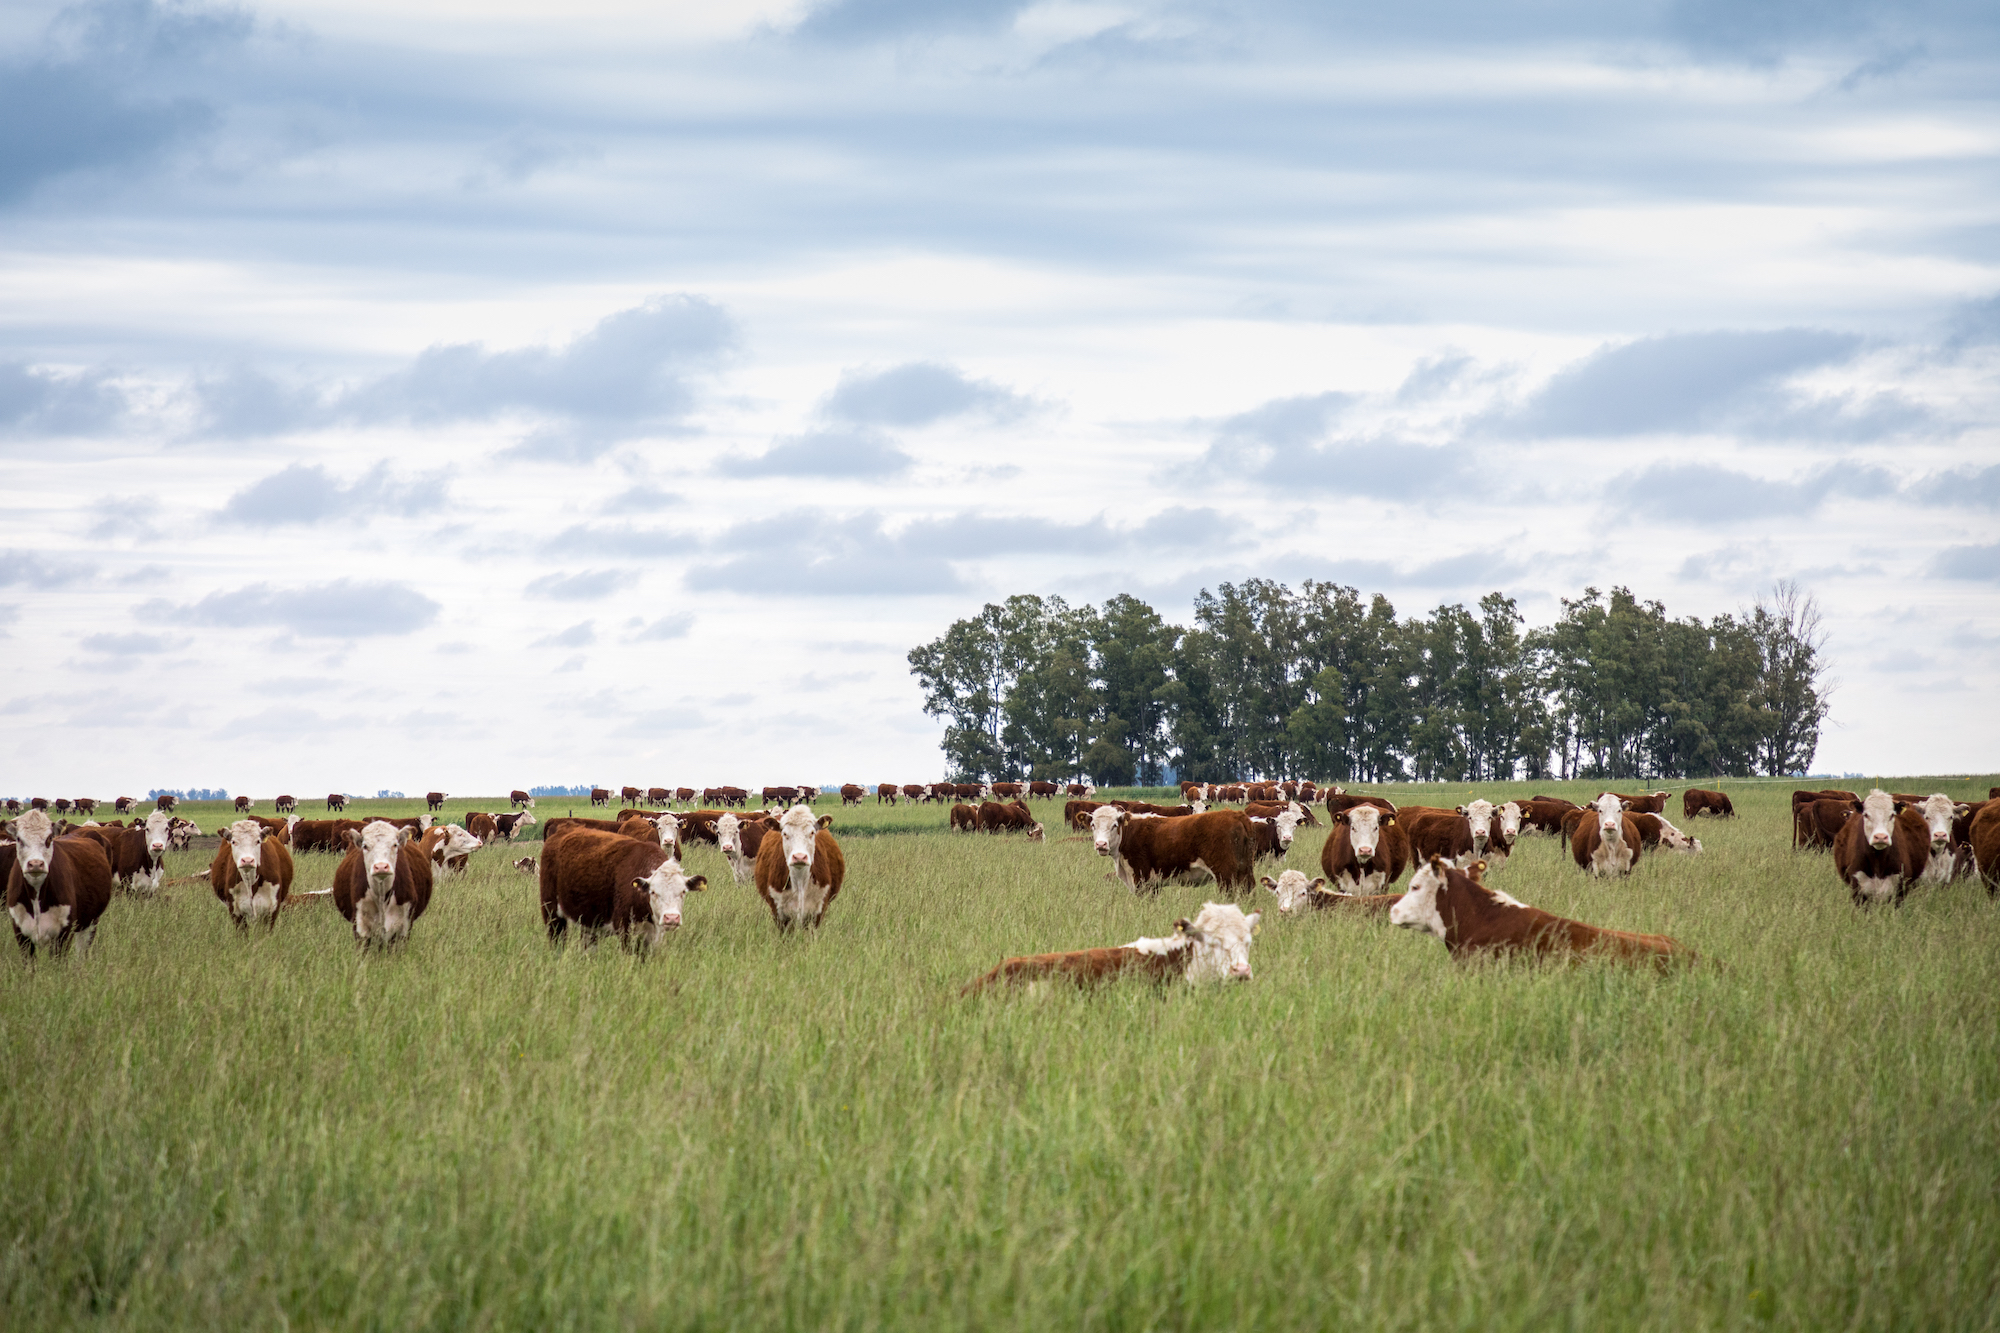 <p>Cattle at an Estancia Caldenes farm in Argentina, where production is supposedly ‘carbon positive’. A new study says broader production and dietary shifts could help lower livestock sector emissions in Latin America (Image courtesy of Estancia Caldenes)</p>